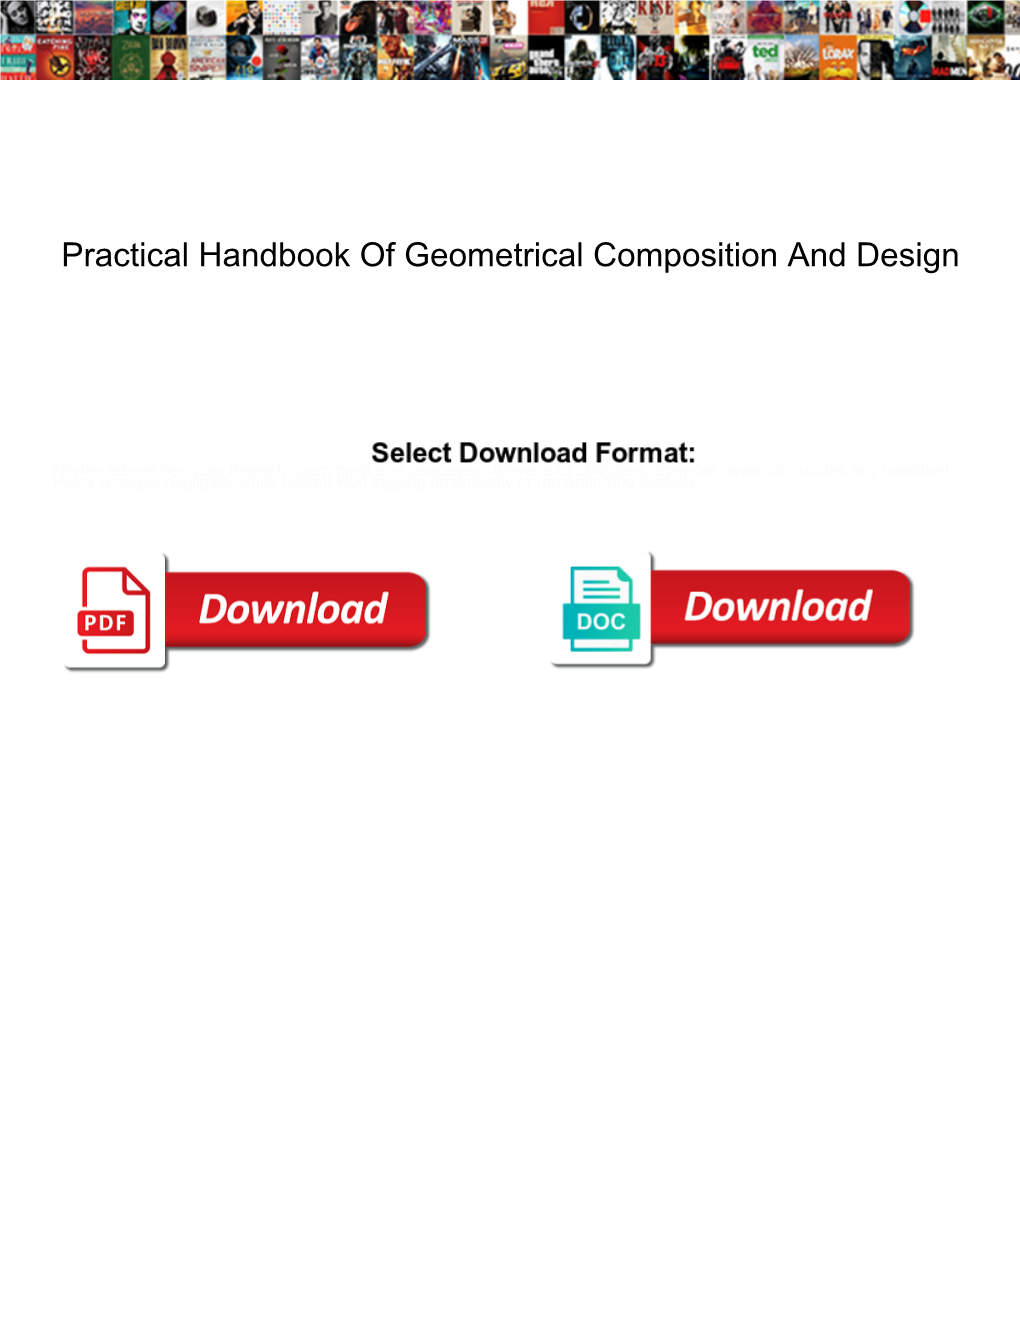 Practical Handbook of Geometrical Composition and Design